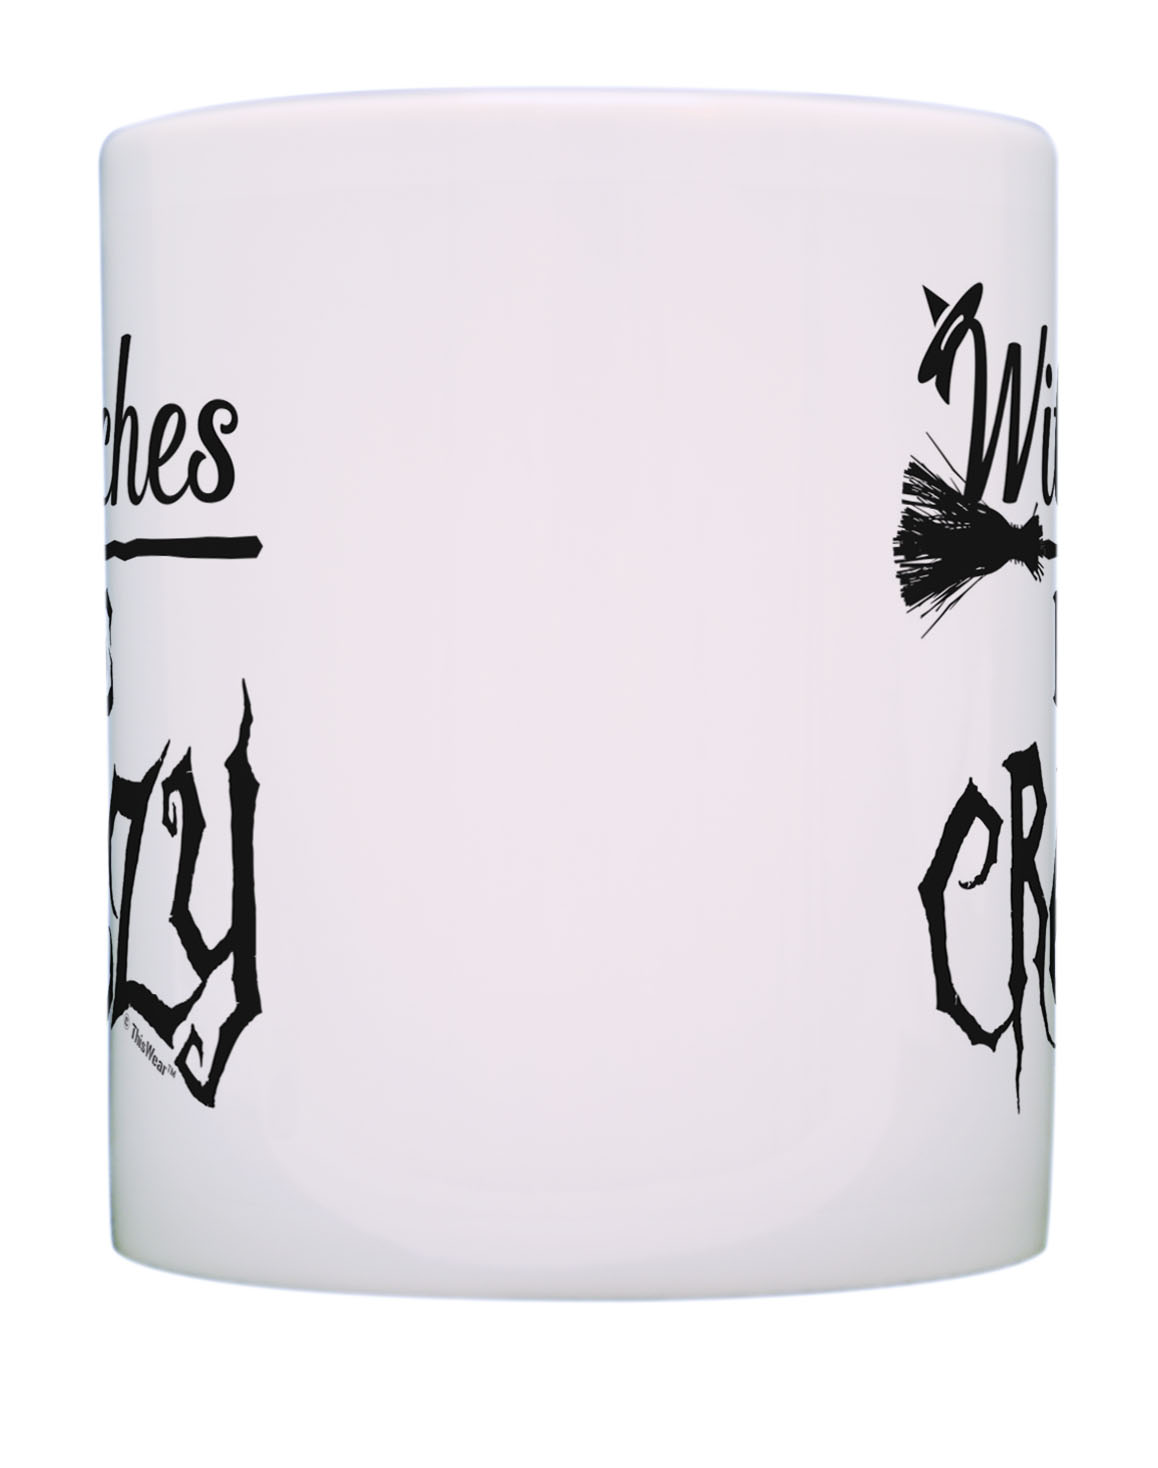 ThisWear Witch Gifts Witches Be Crazy Halloween Mug Set Pun Mug Set 11 ounce 2 Pack Coffee Mugs - image 3 of 4